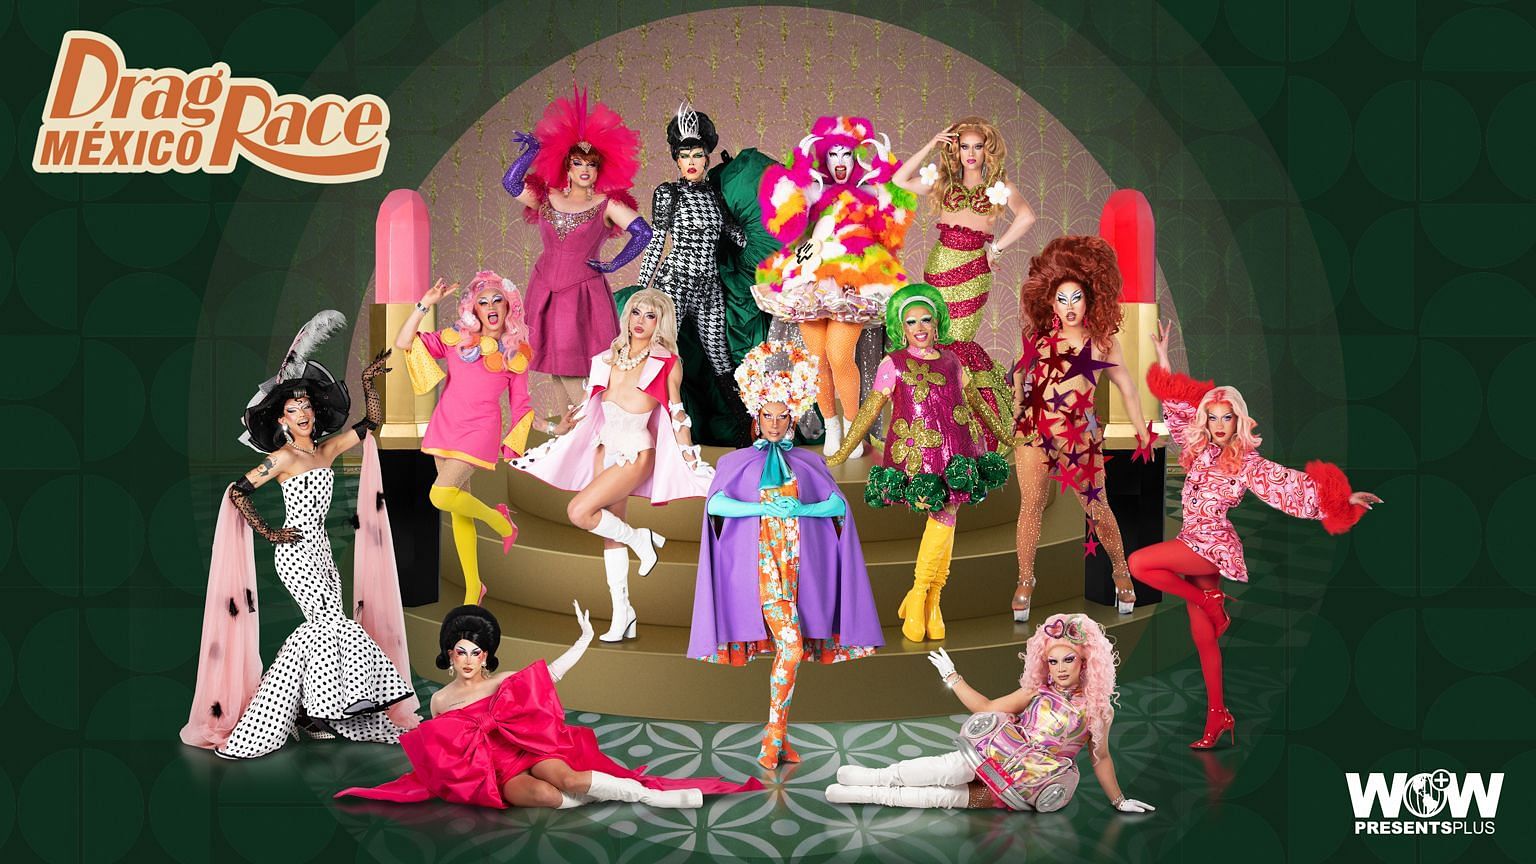 Drag Race Mexico Season 2 (Credits: @DragRaceMexico official Twitter page) 